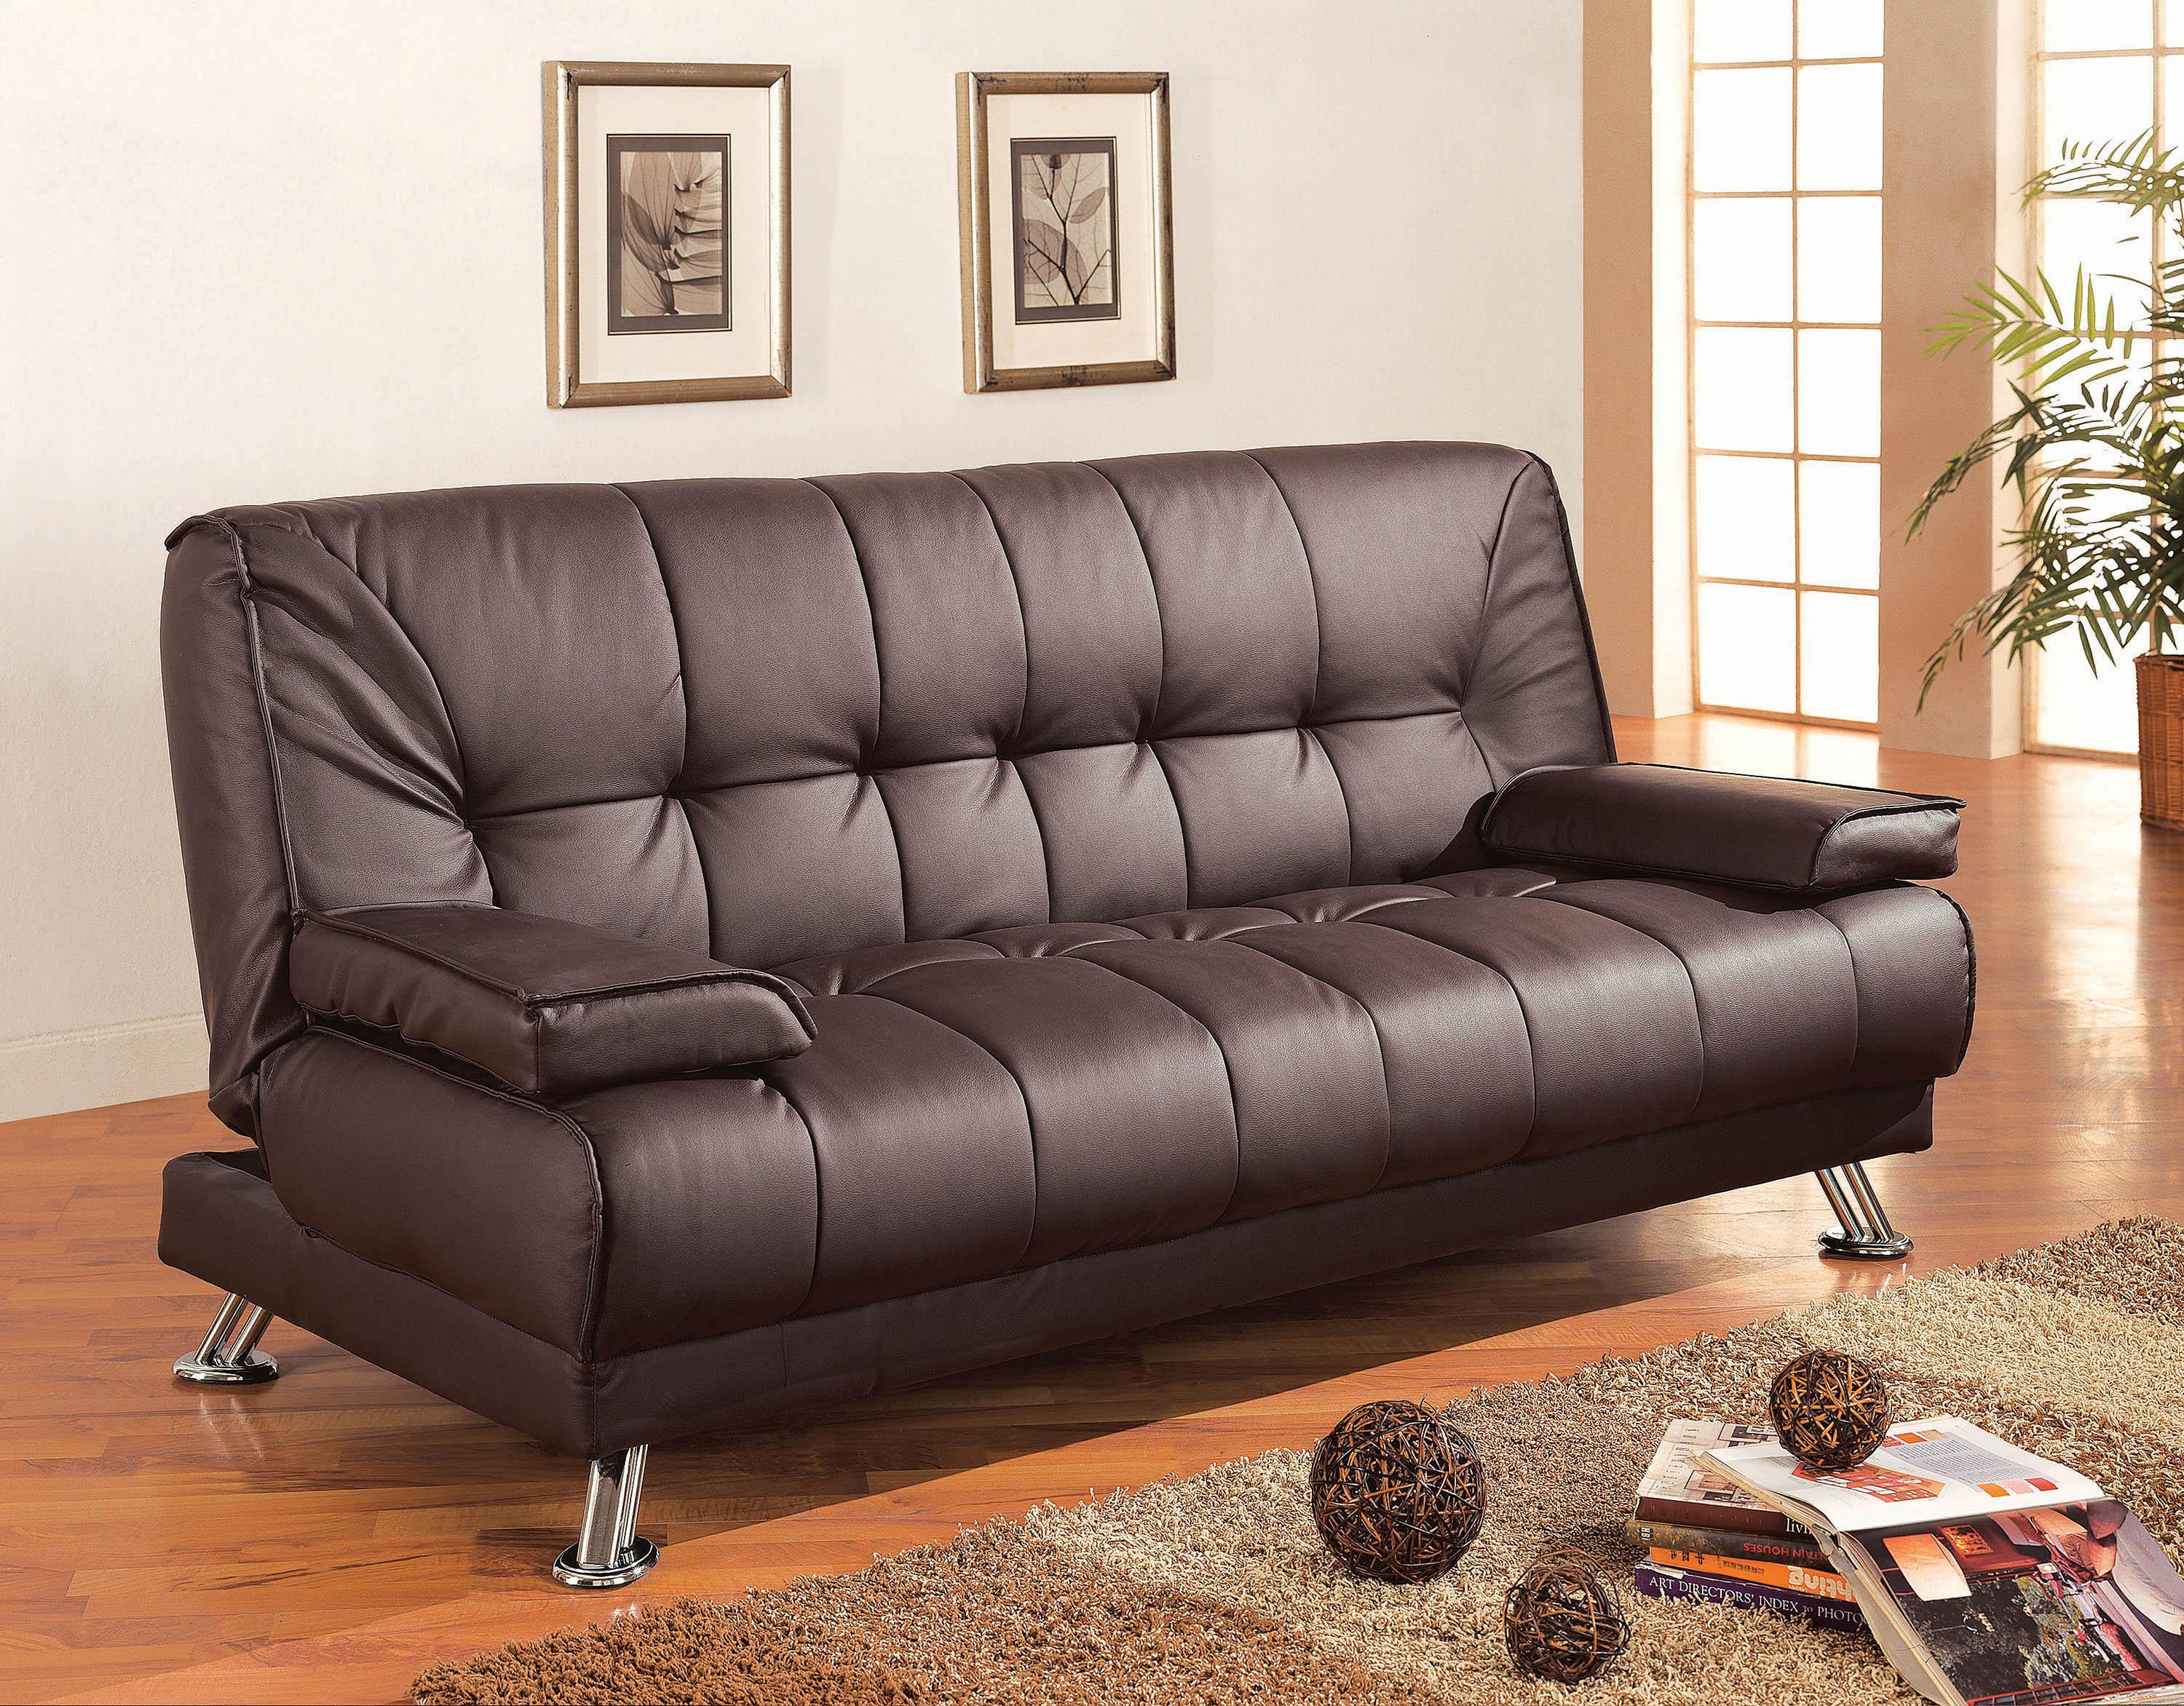 

    
Transitional Brown Leatherette Sofa Bed Coaster 300148 Pierre
